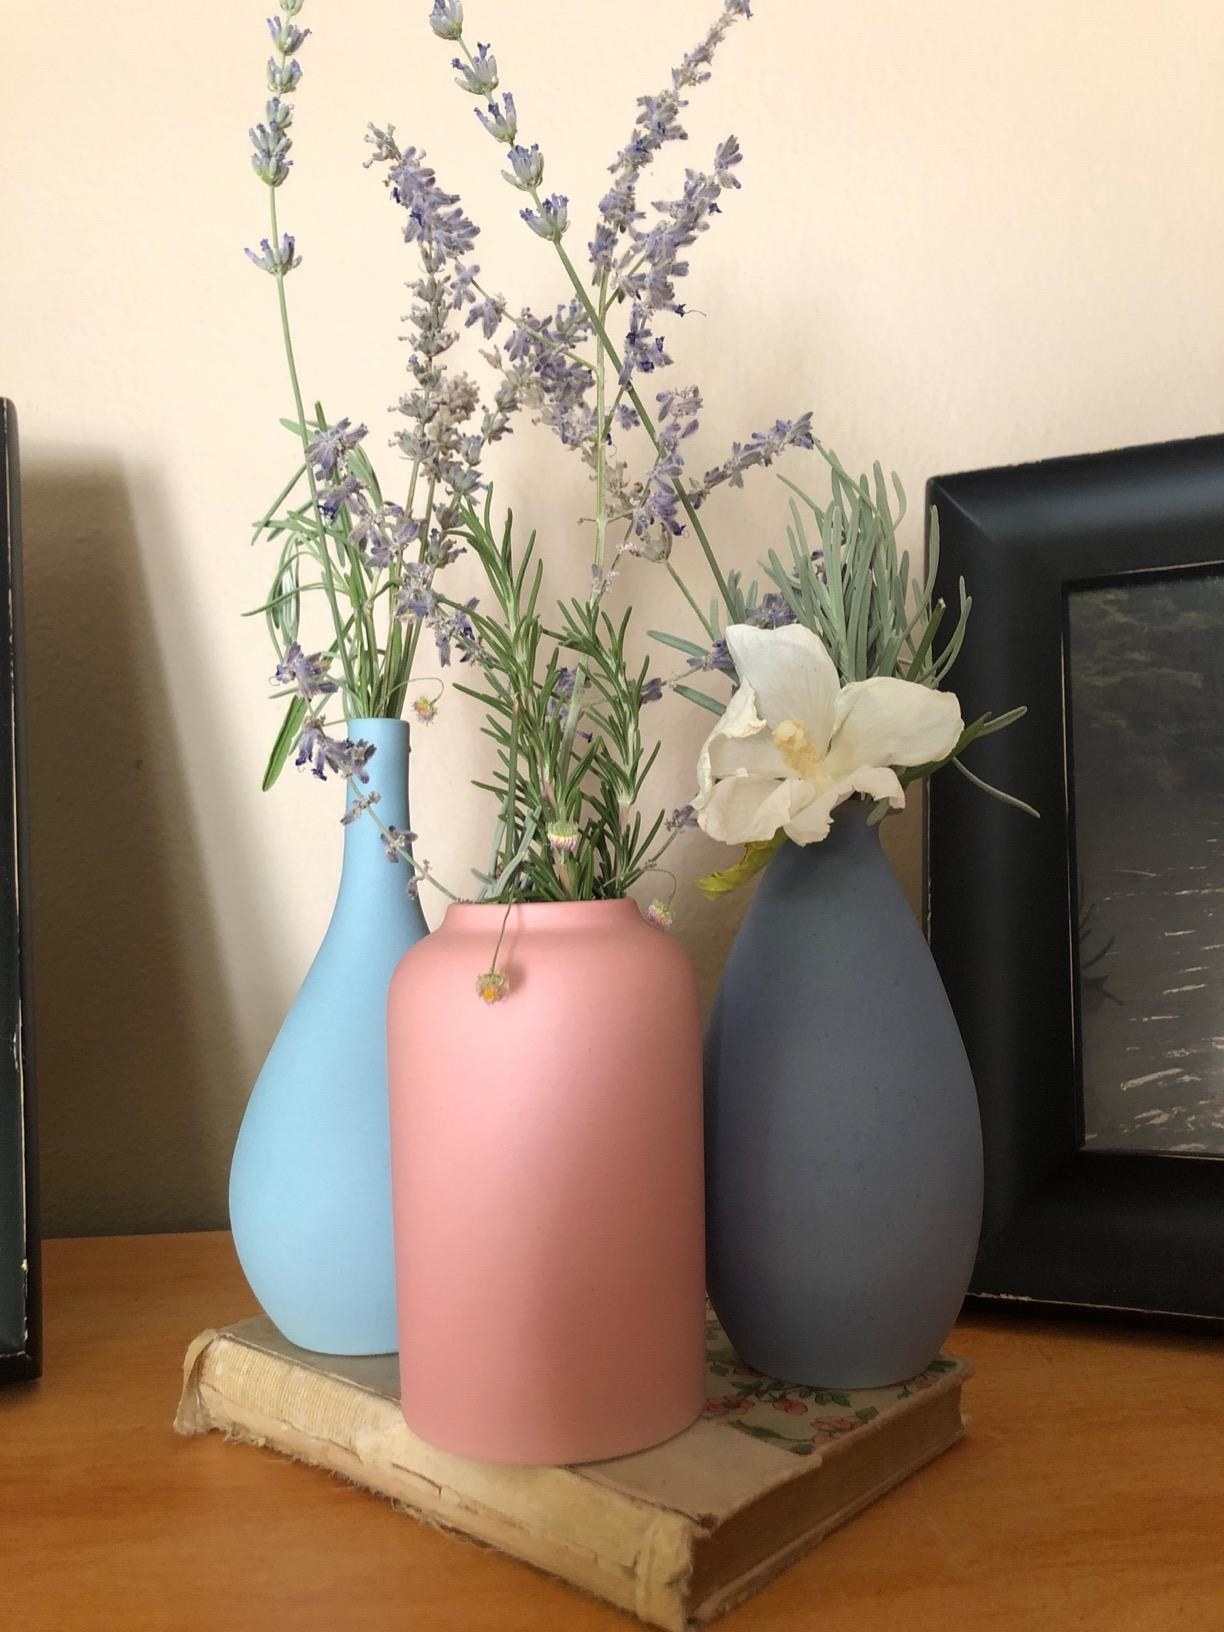 three of the vases in pink, blue, and purple